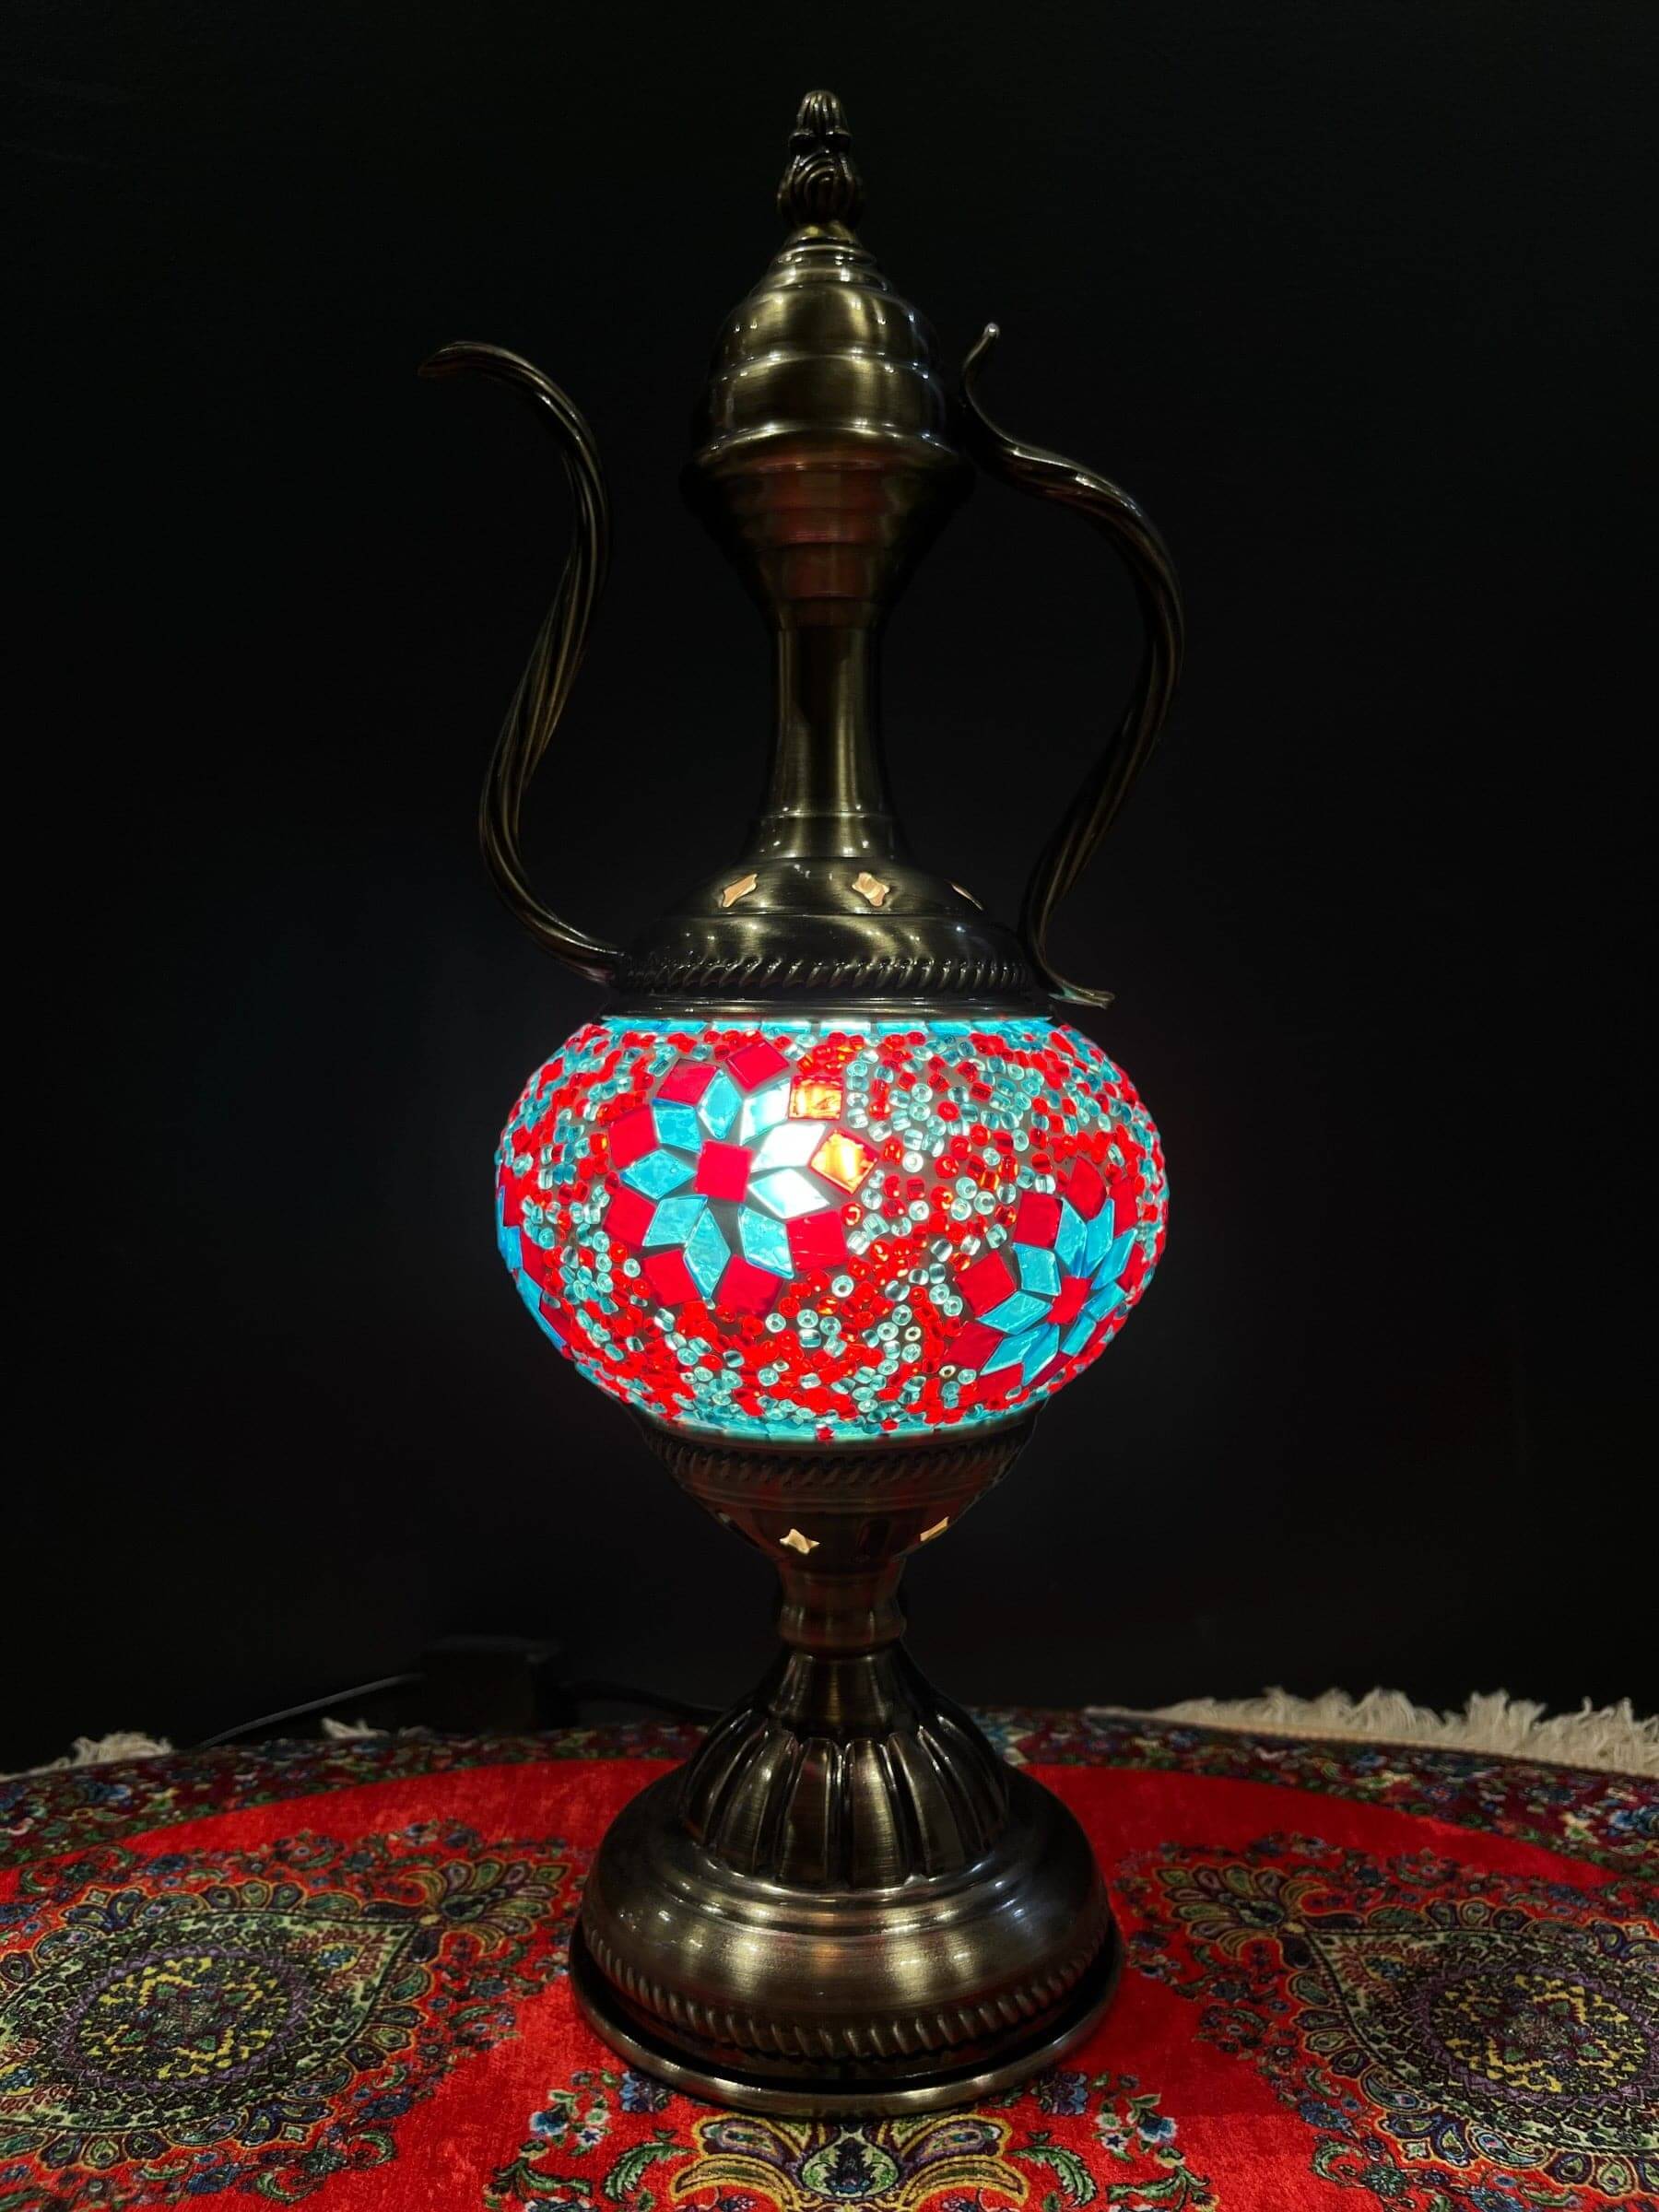 Elevate your decor with the enchanting charm of our Turkish Mosaic Genie Lamp. Handcrafted by skilled artisans, this exquisite lamp captures the spirit of the mystical East. Its intricate mosaic glass design creates a mesmerizing play of light and color,